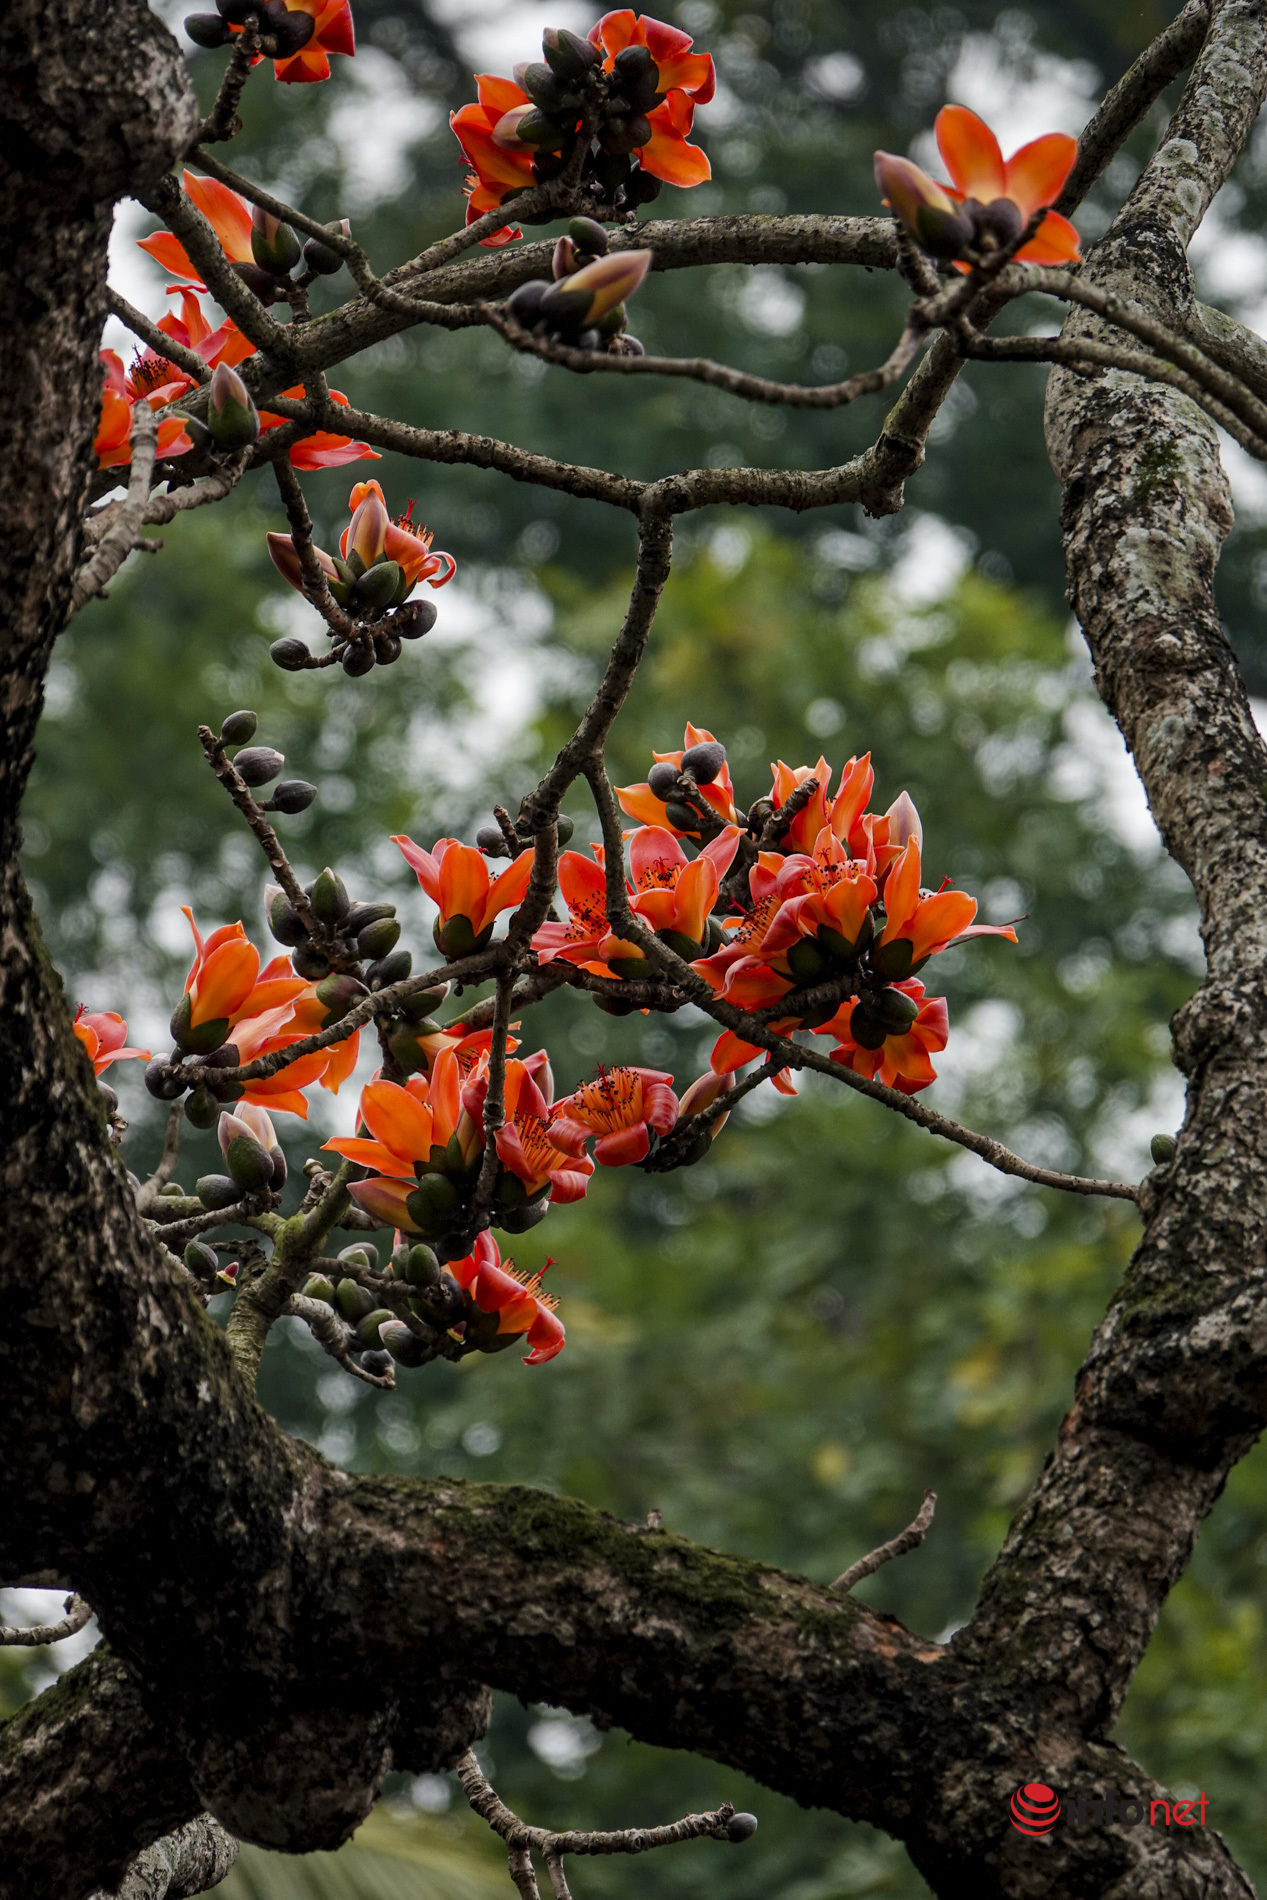 Bright red rice flowers stand out against the sky, there are picturesque 'Hanoi corners'